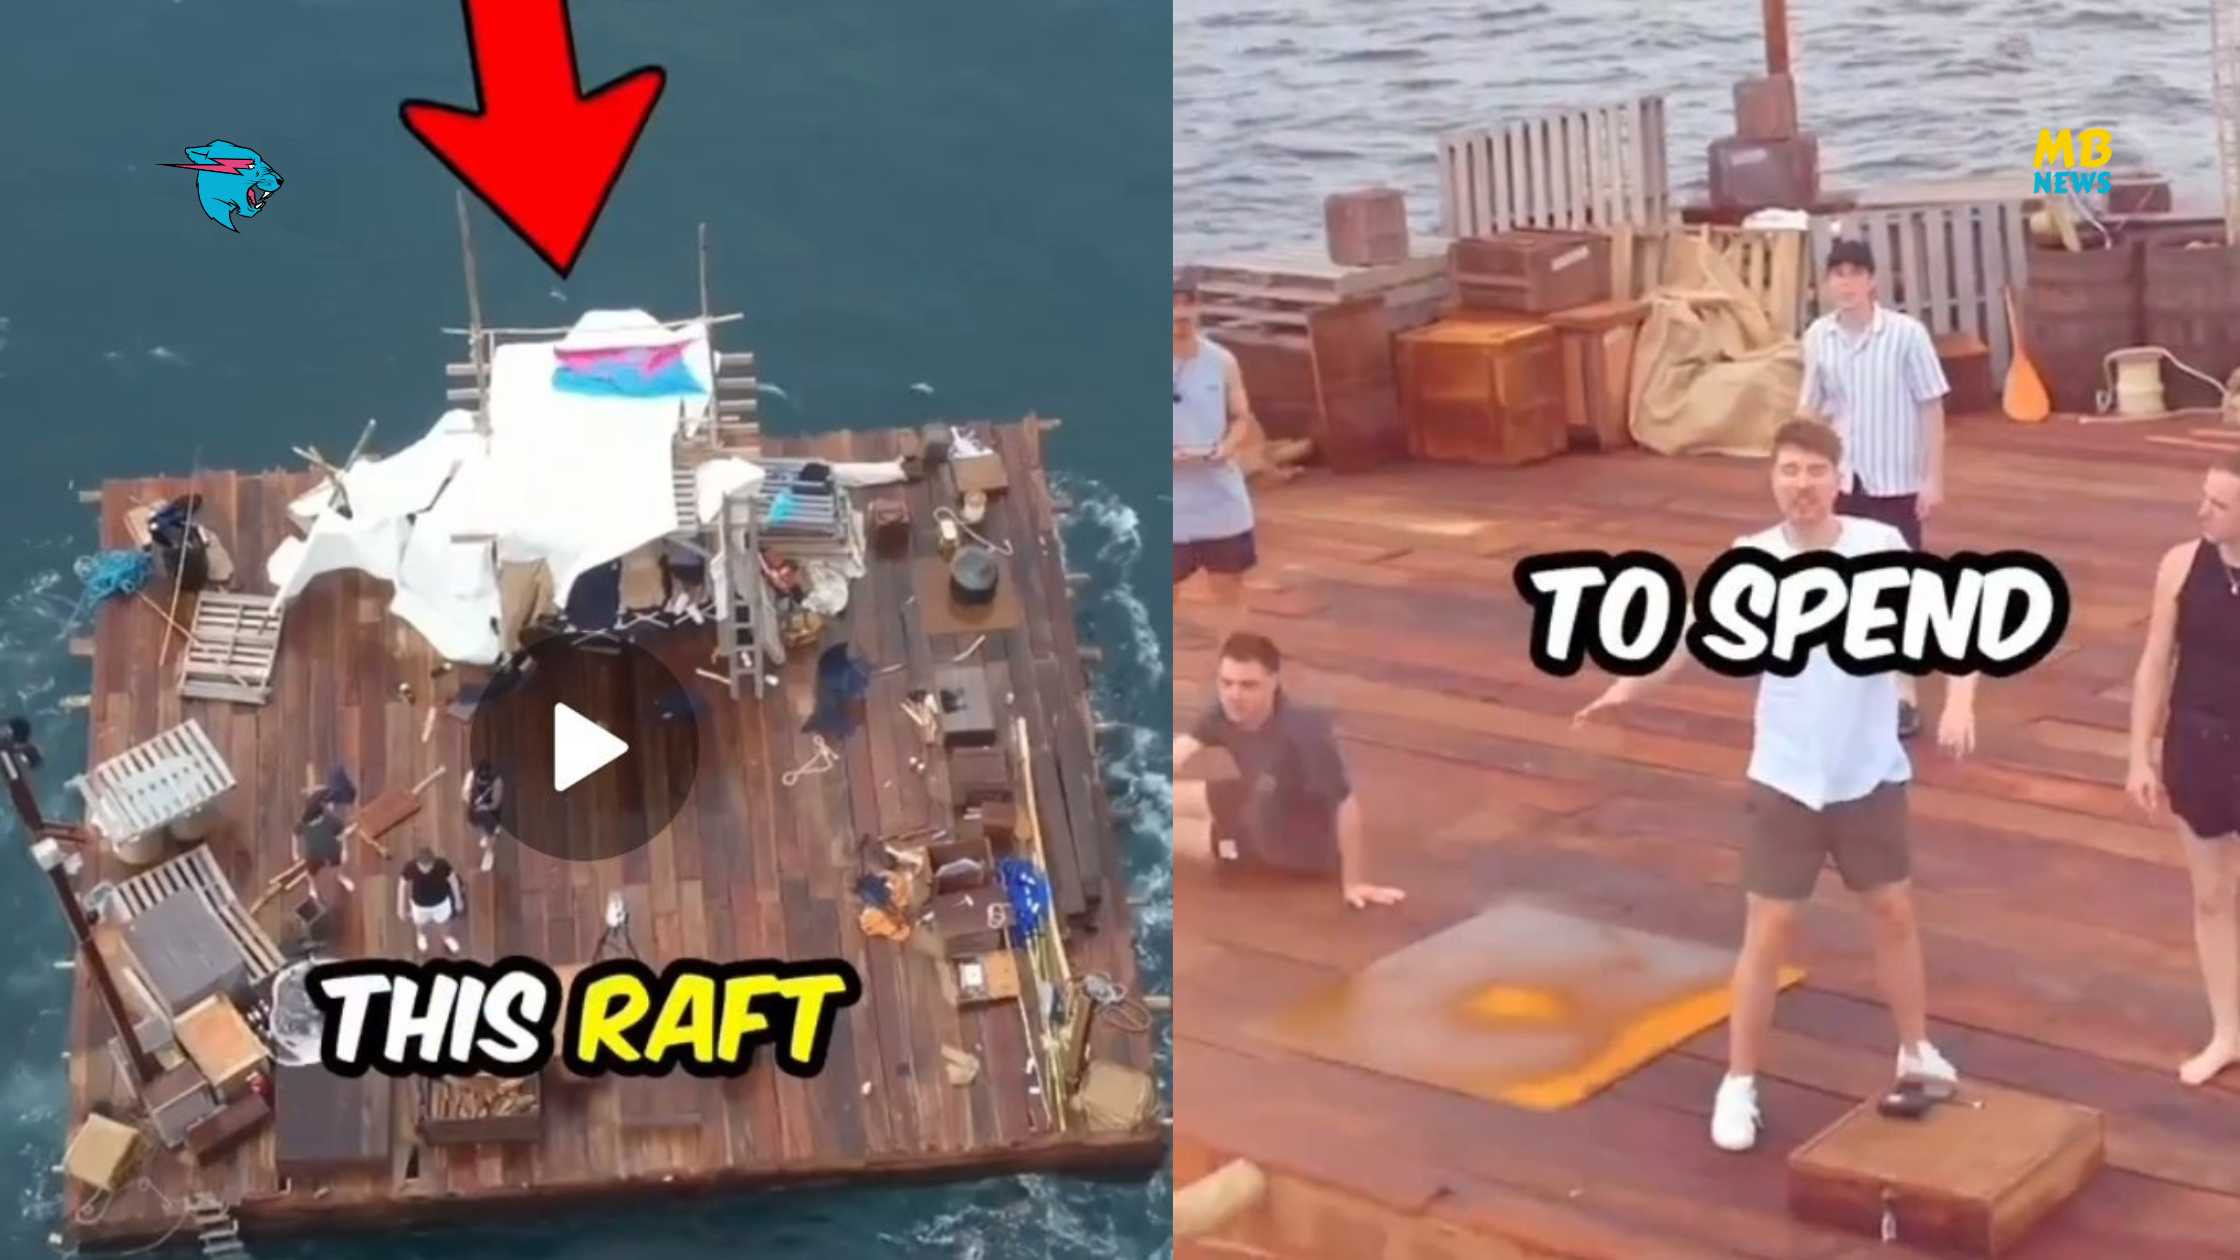 MrBeast and His Crew Survive 7-Day Ocean Raft Ordeal Video Release Tomorrow, 12 PM EST!